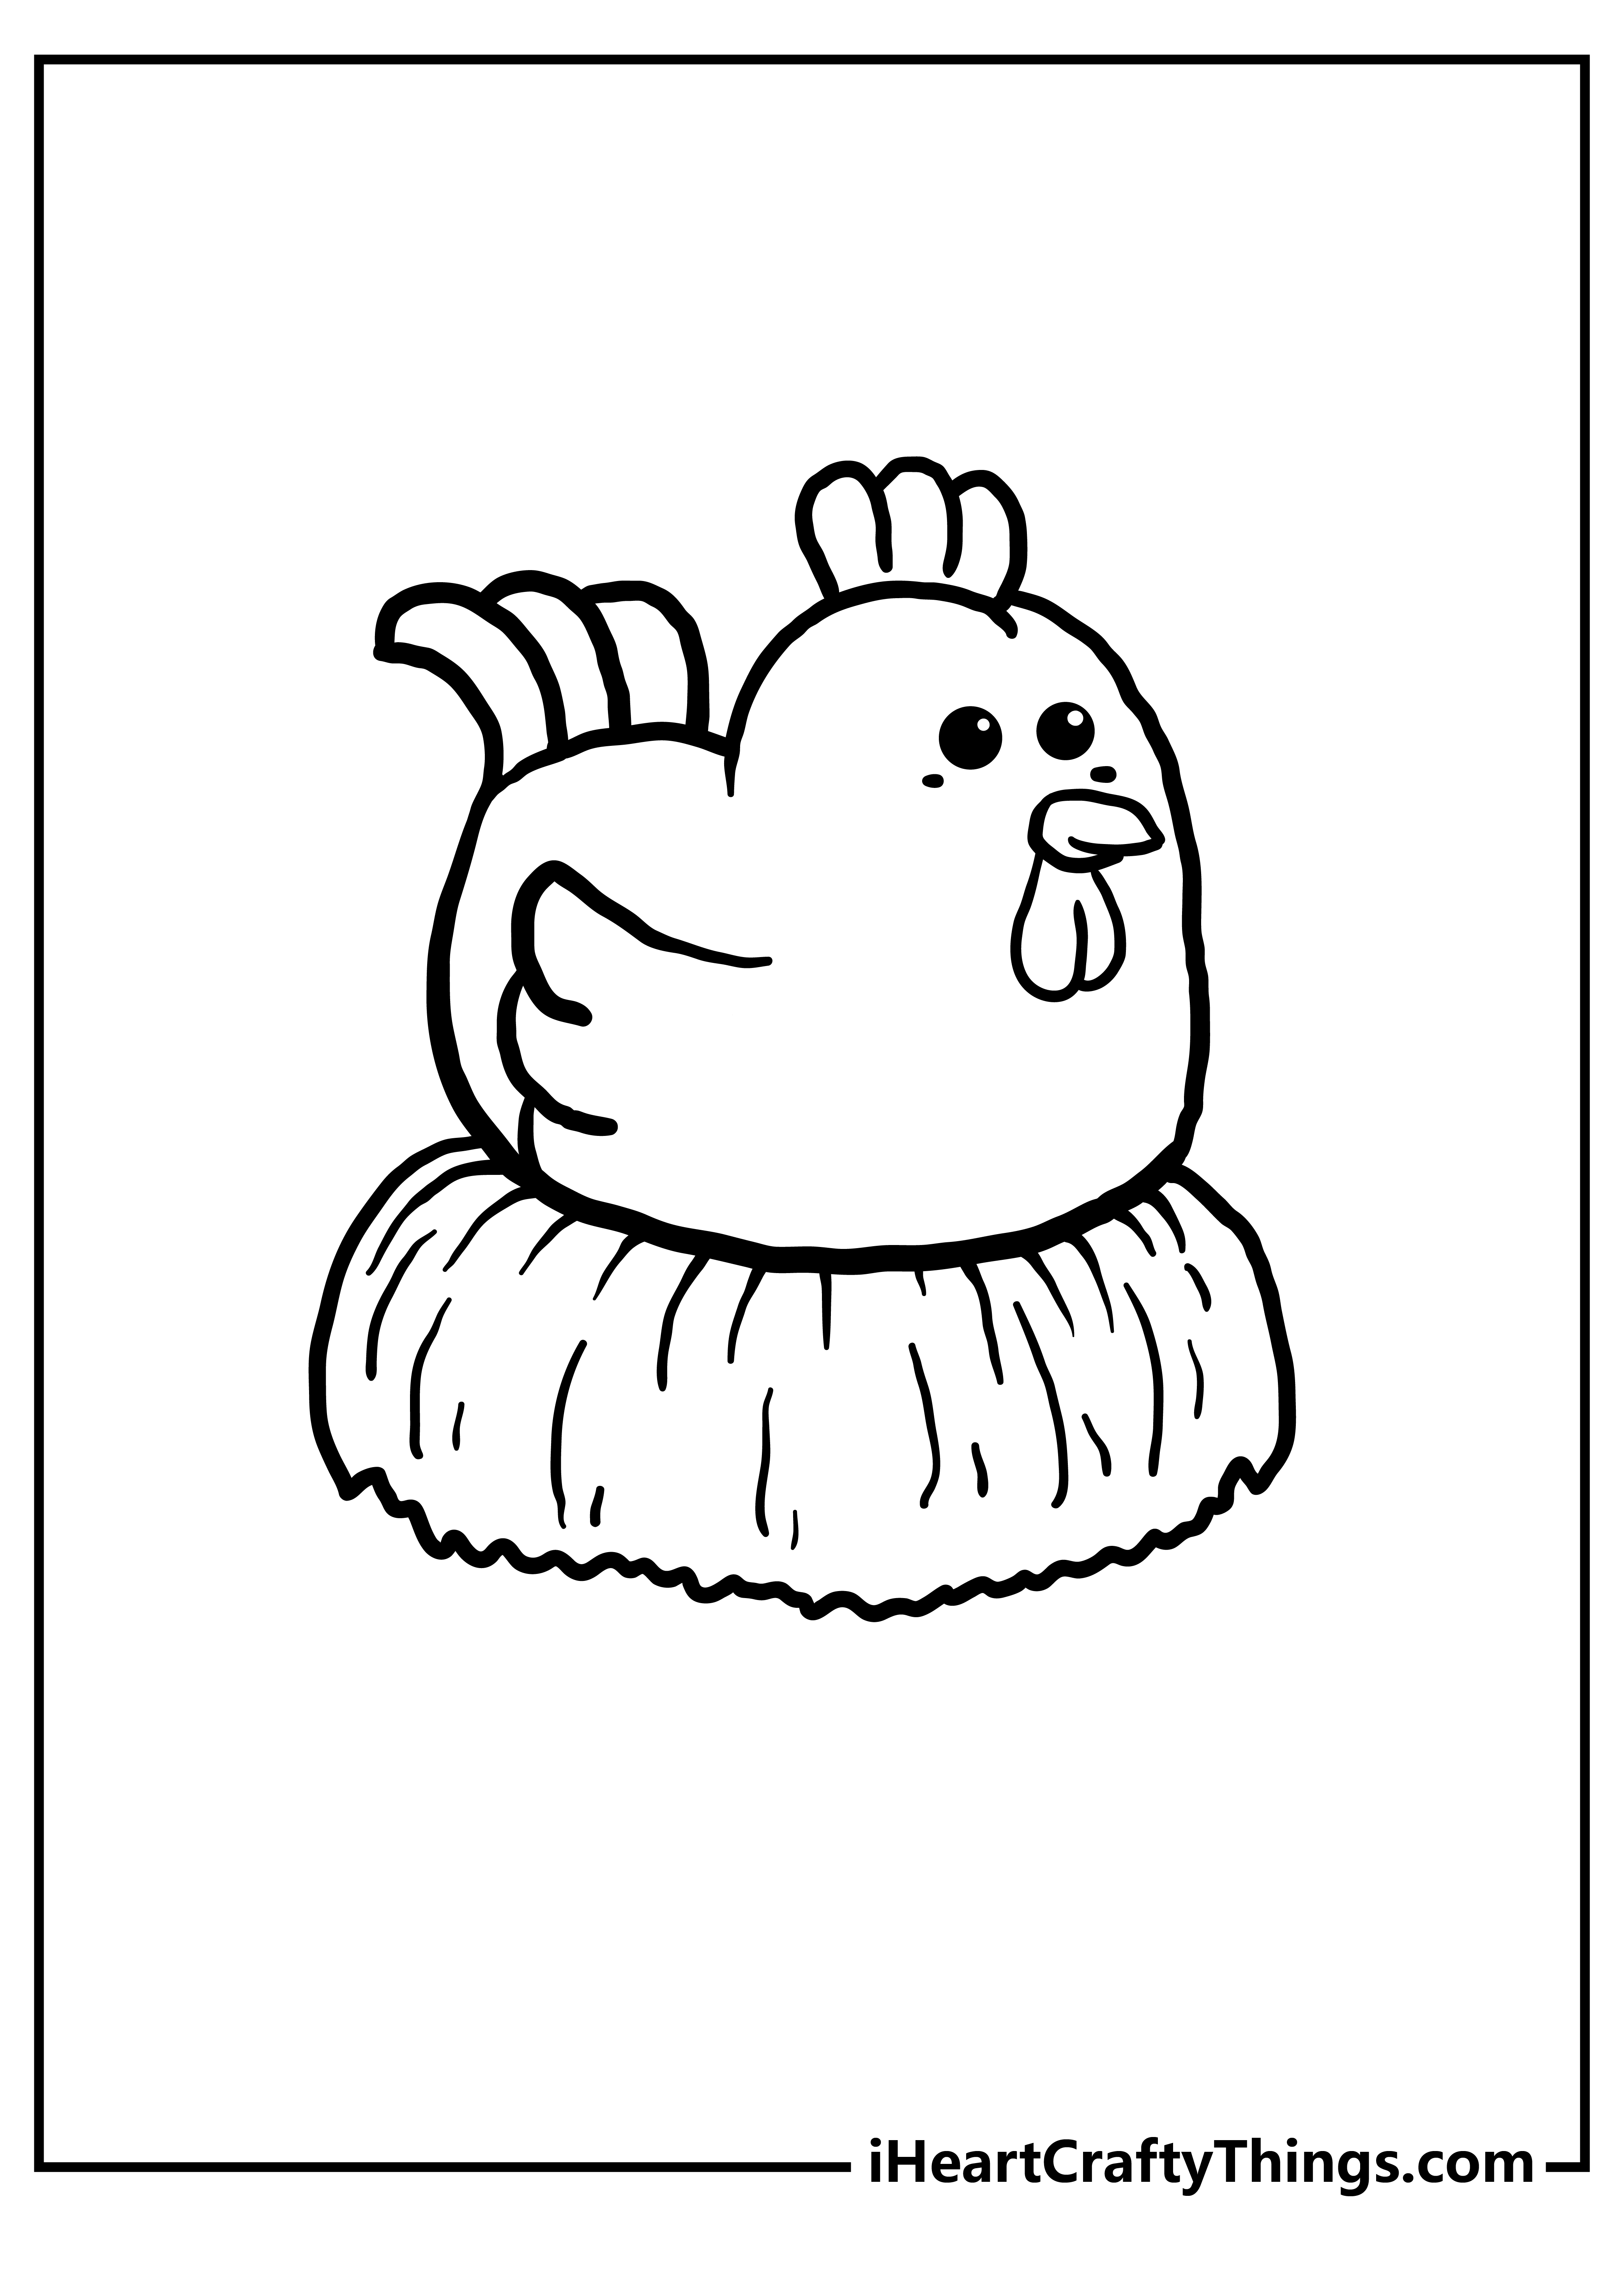 Chicken Coloring Pages for kids free download